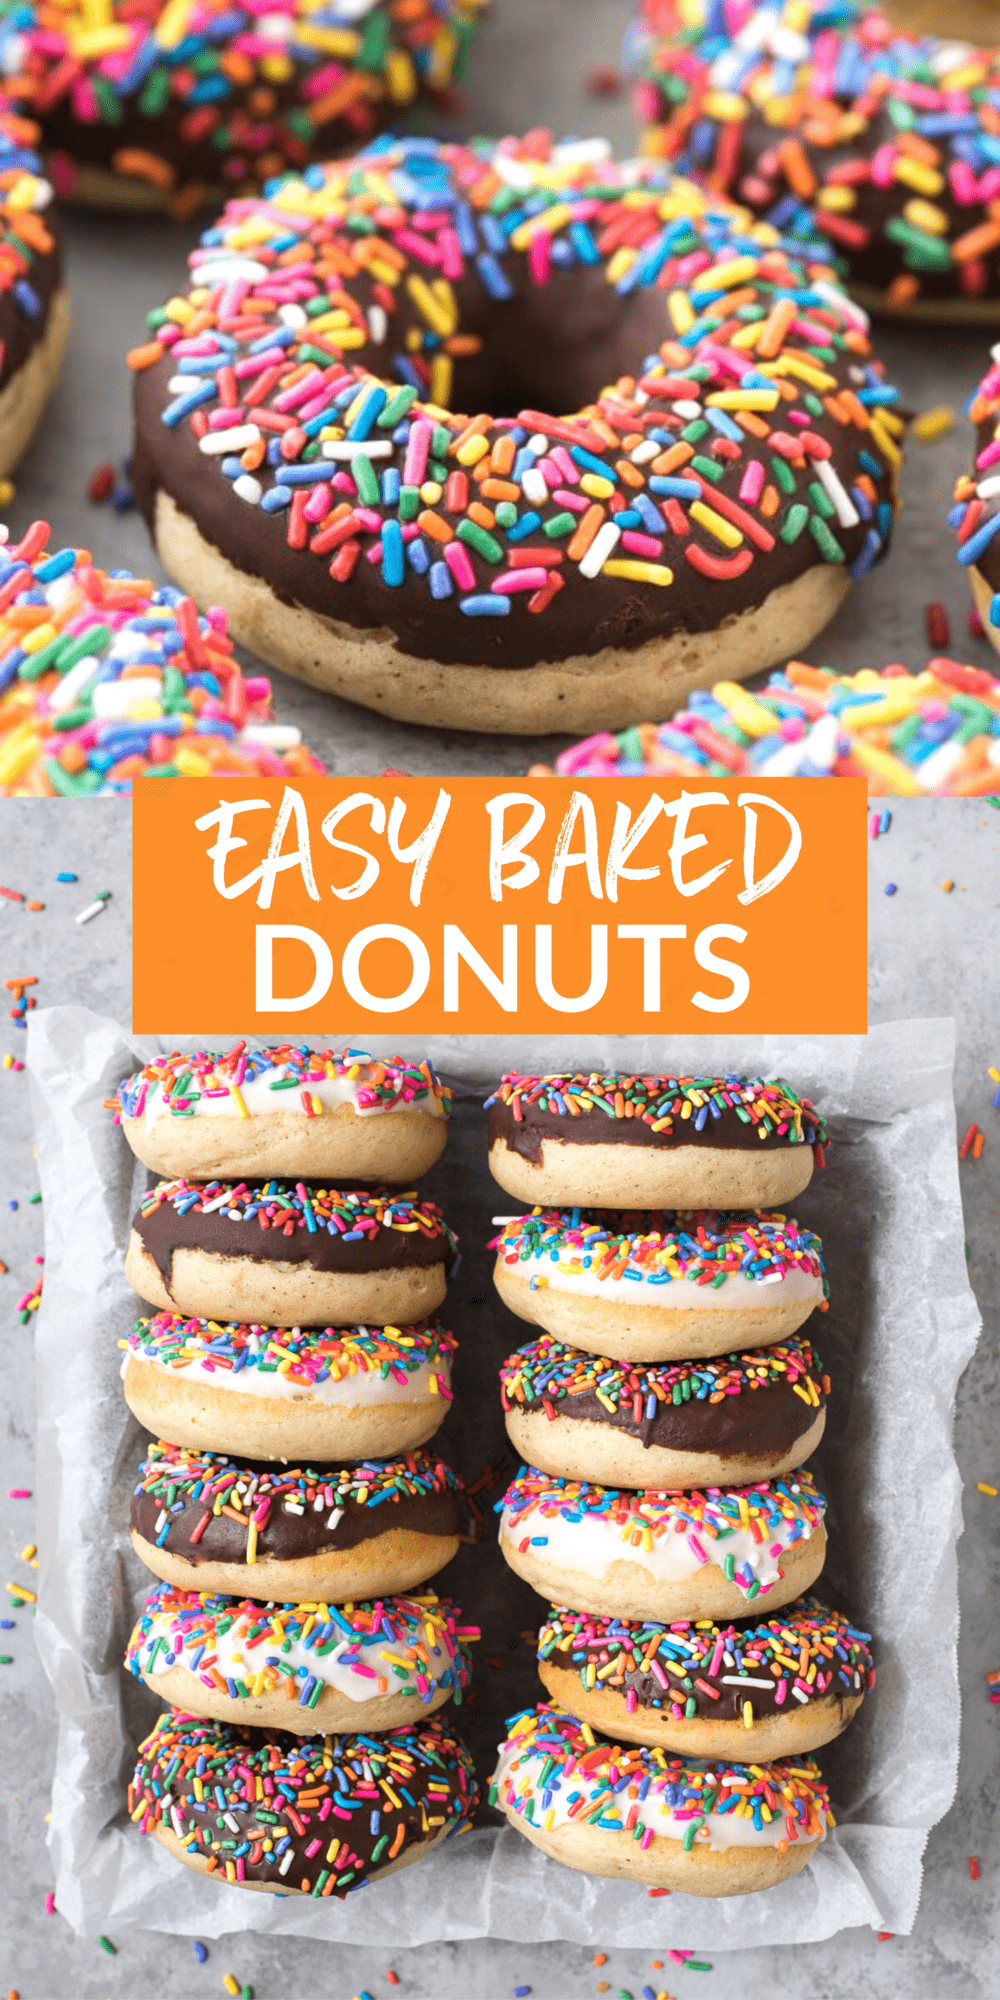 Baked Donut Recipe - an easy baked donut recipe that's ready in 30 mins!